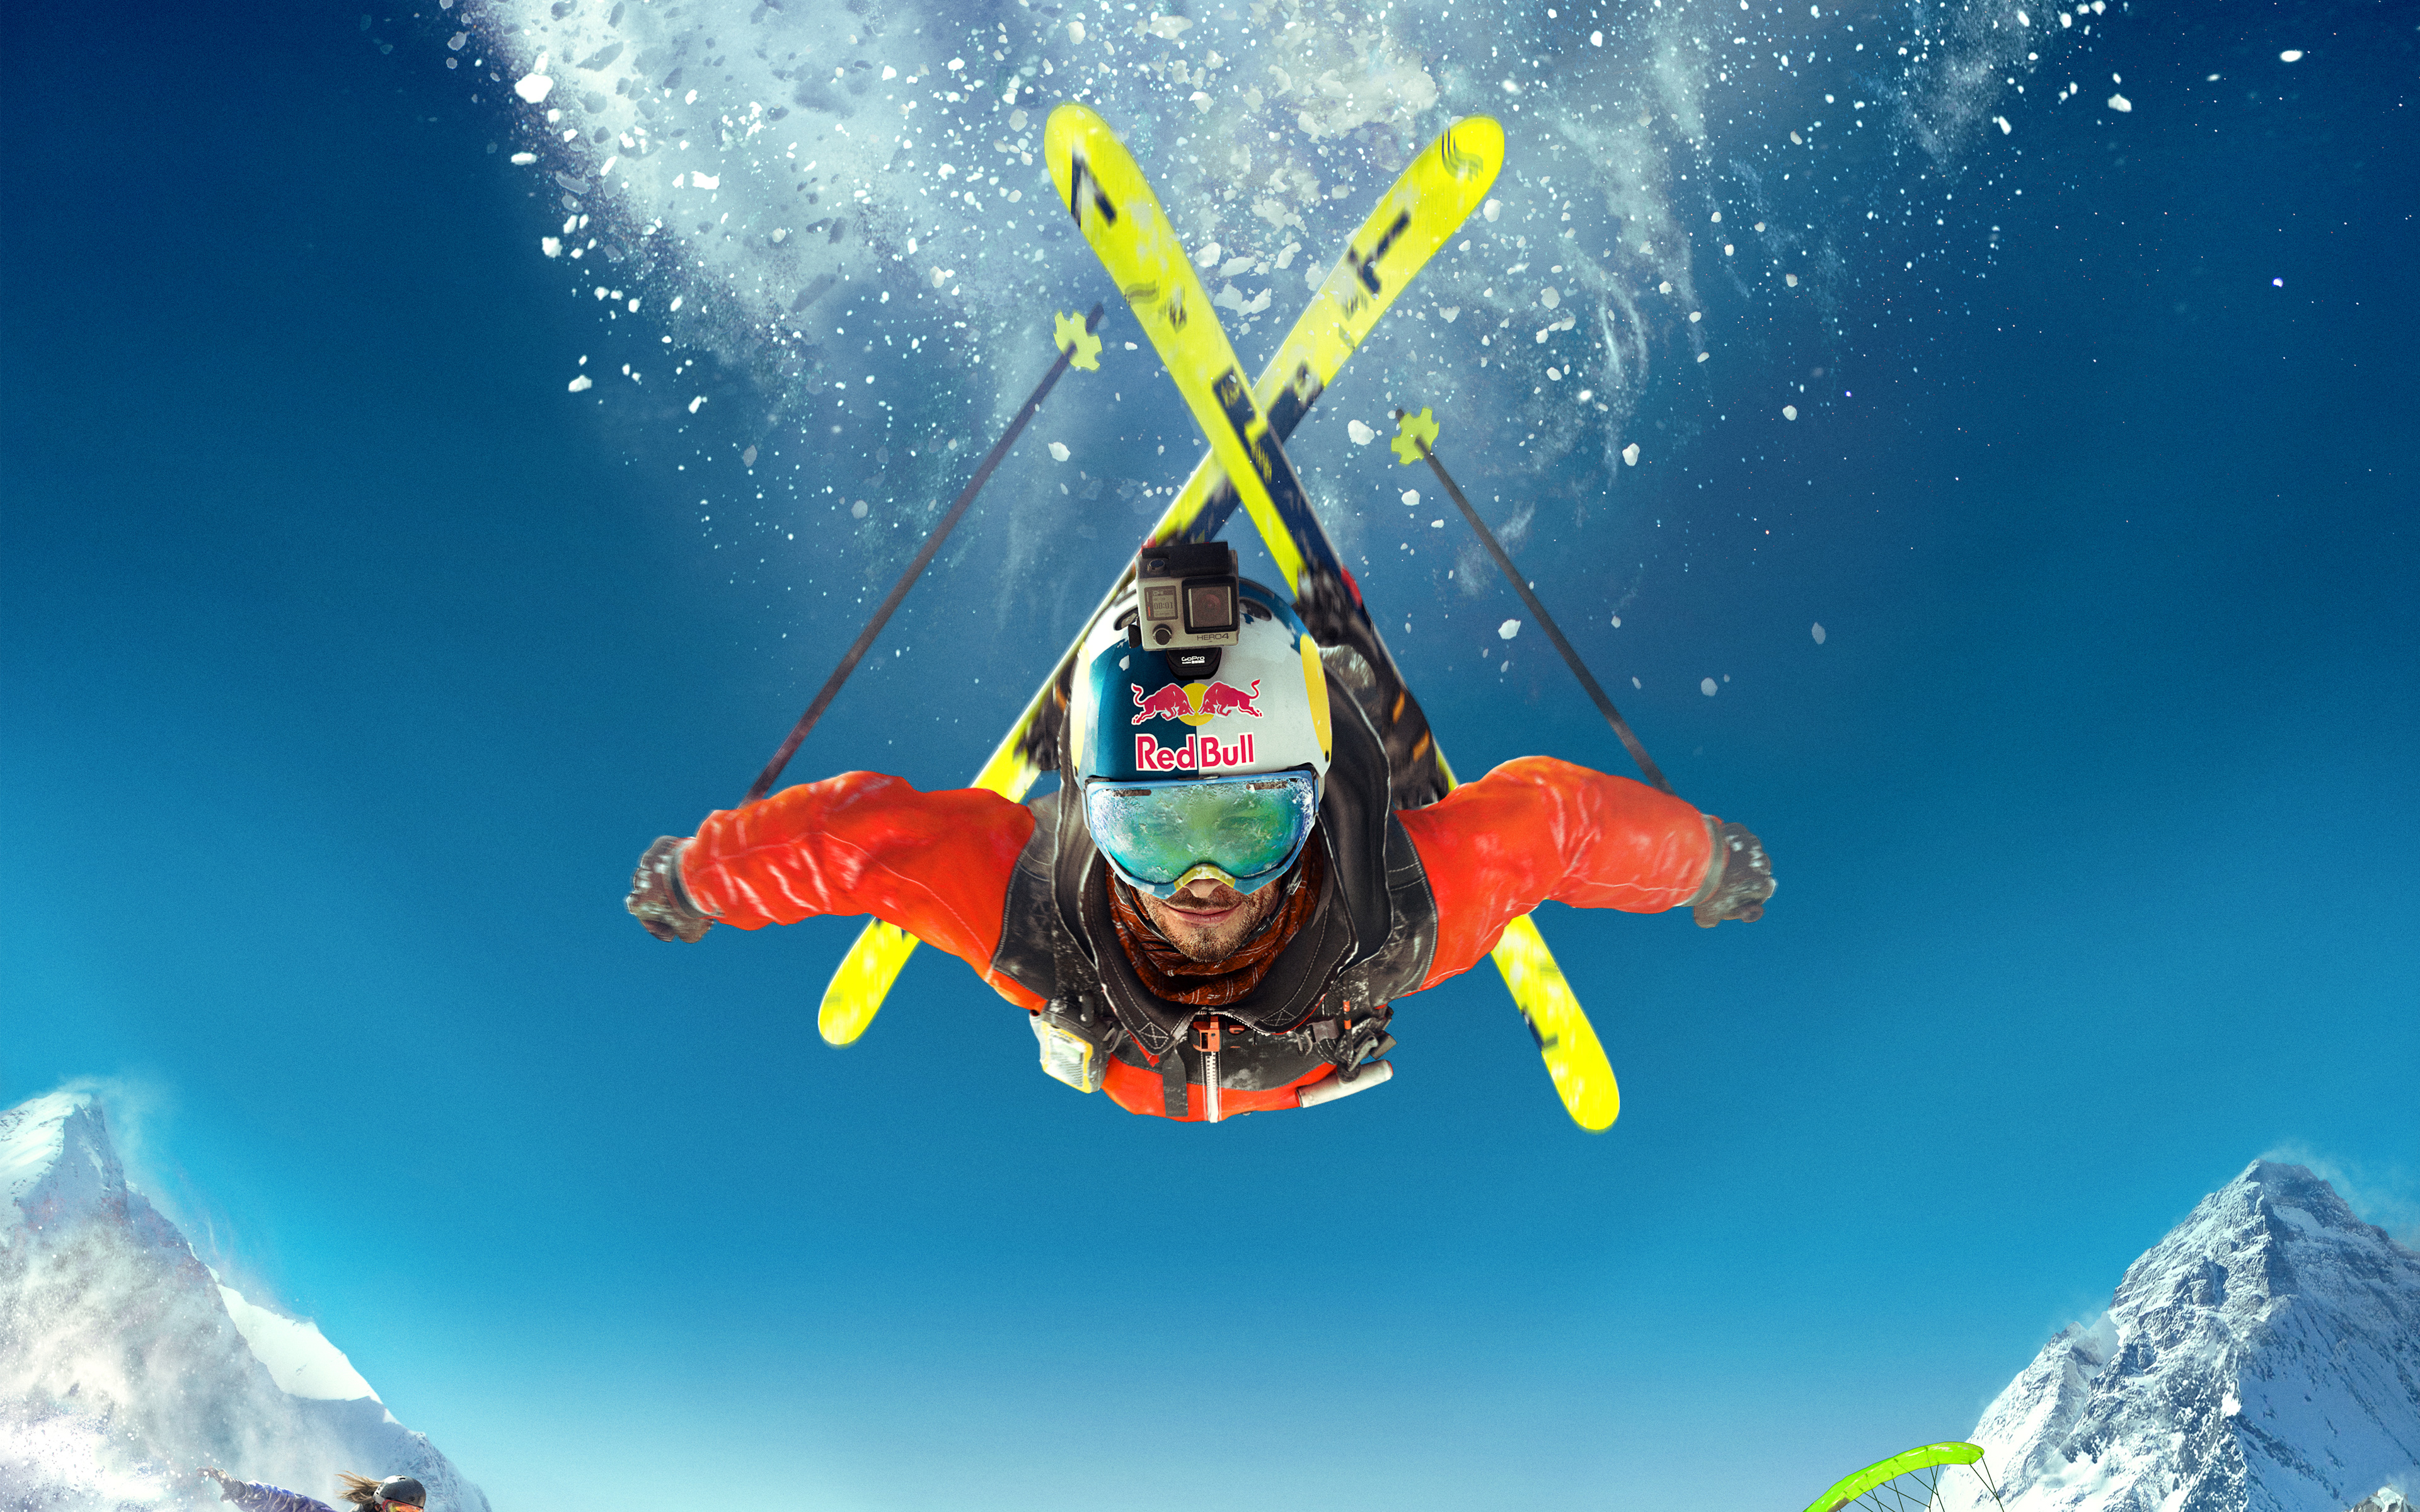 Download Ski wallpapers for mobile phone free Ski HD pictures